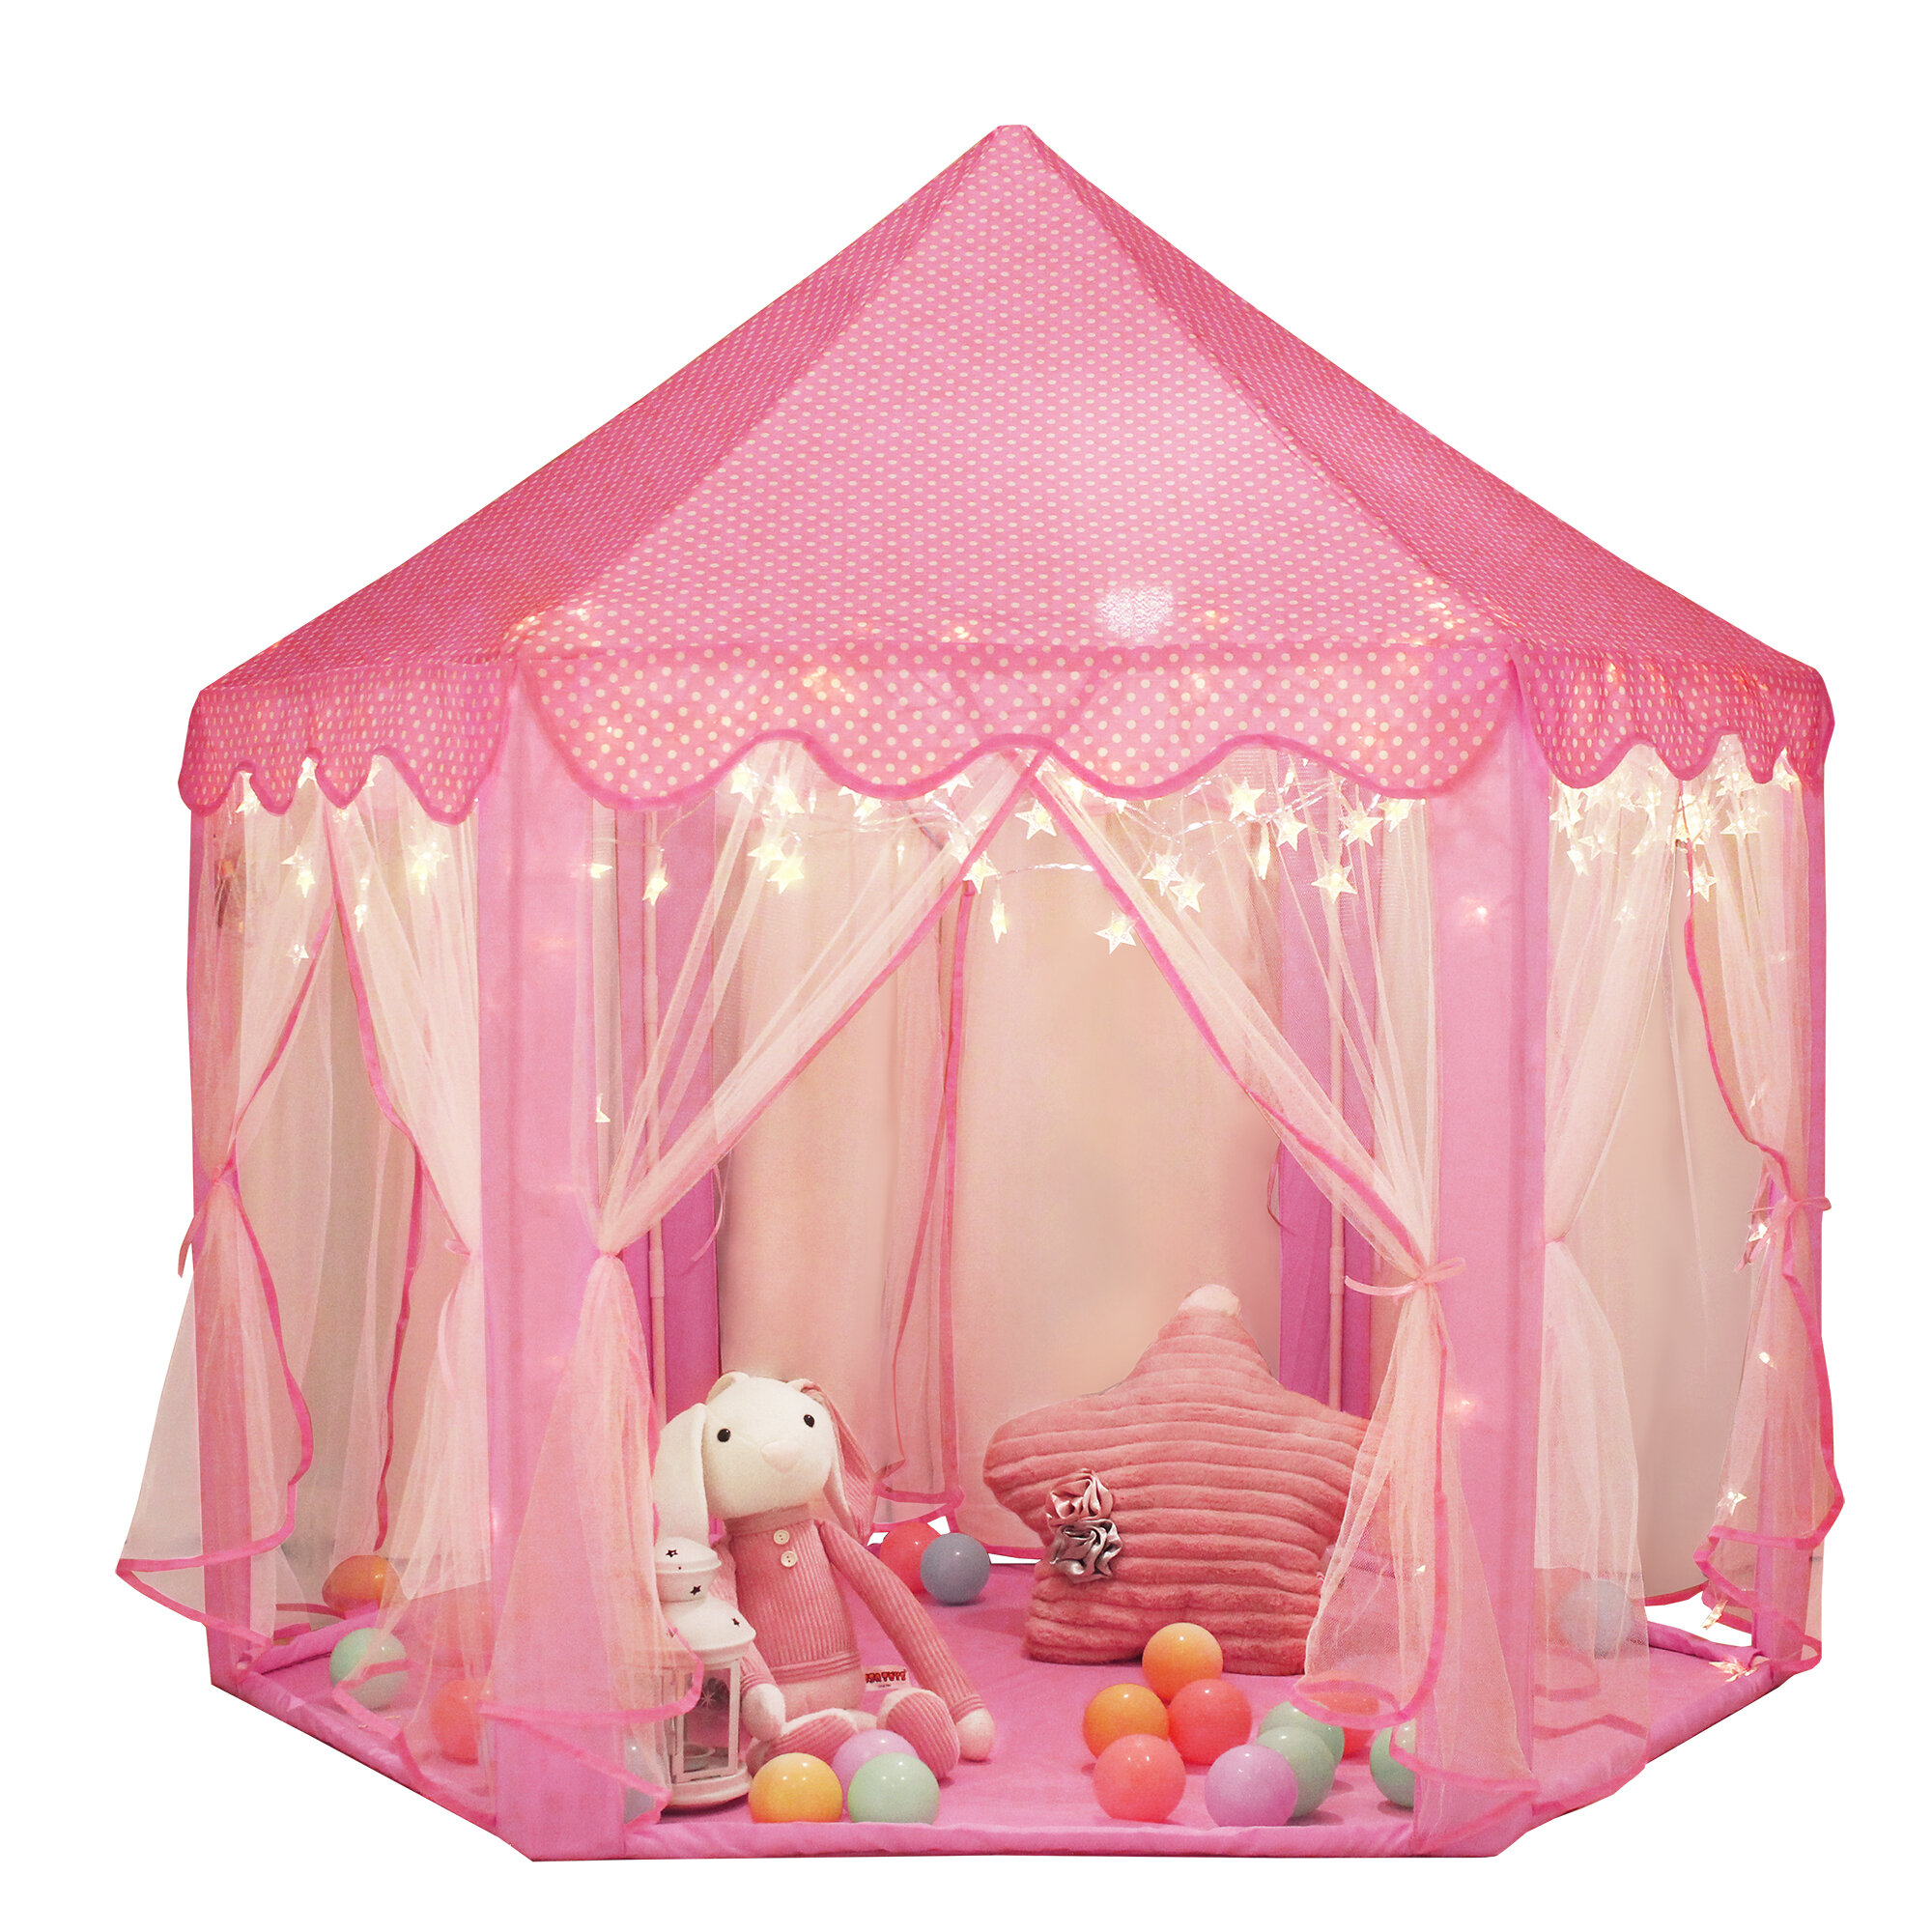 Dream Princess Indoor Playhouse Toy Play Tent for Kids Toddlers with Mat Floor 